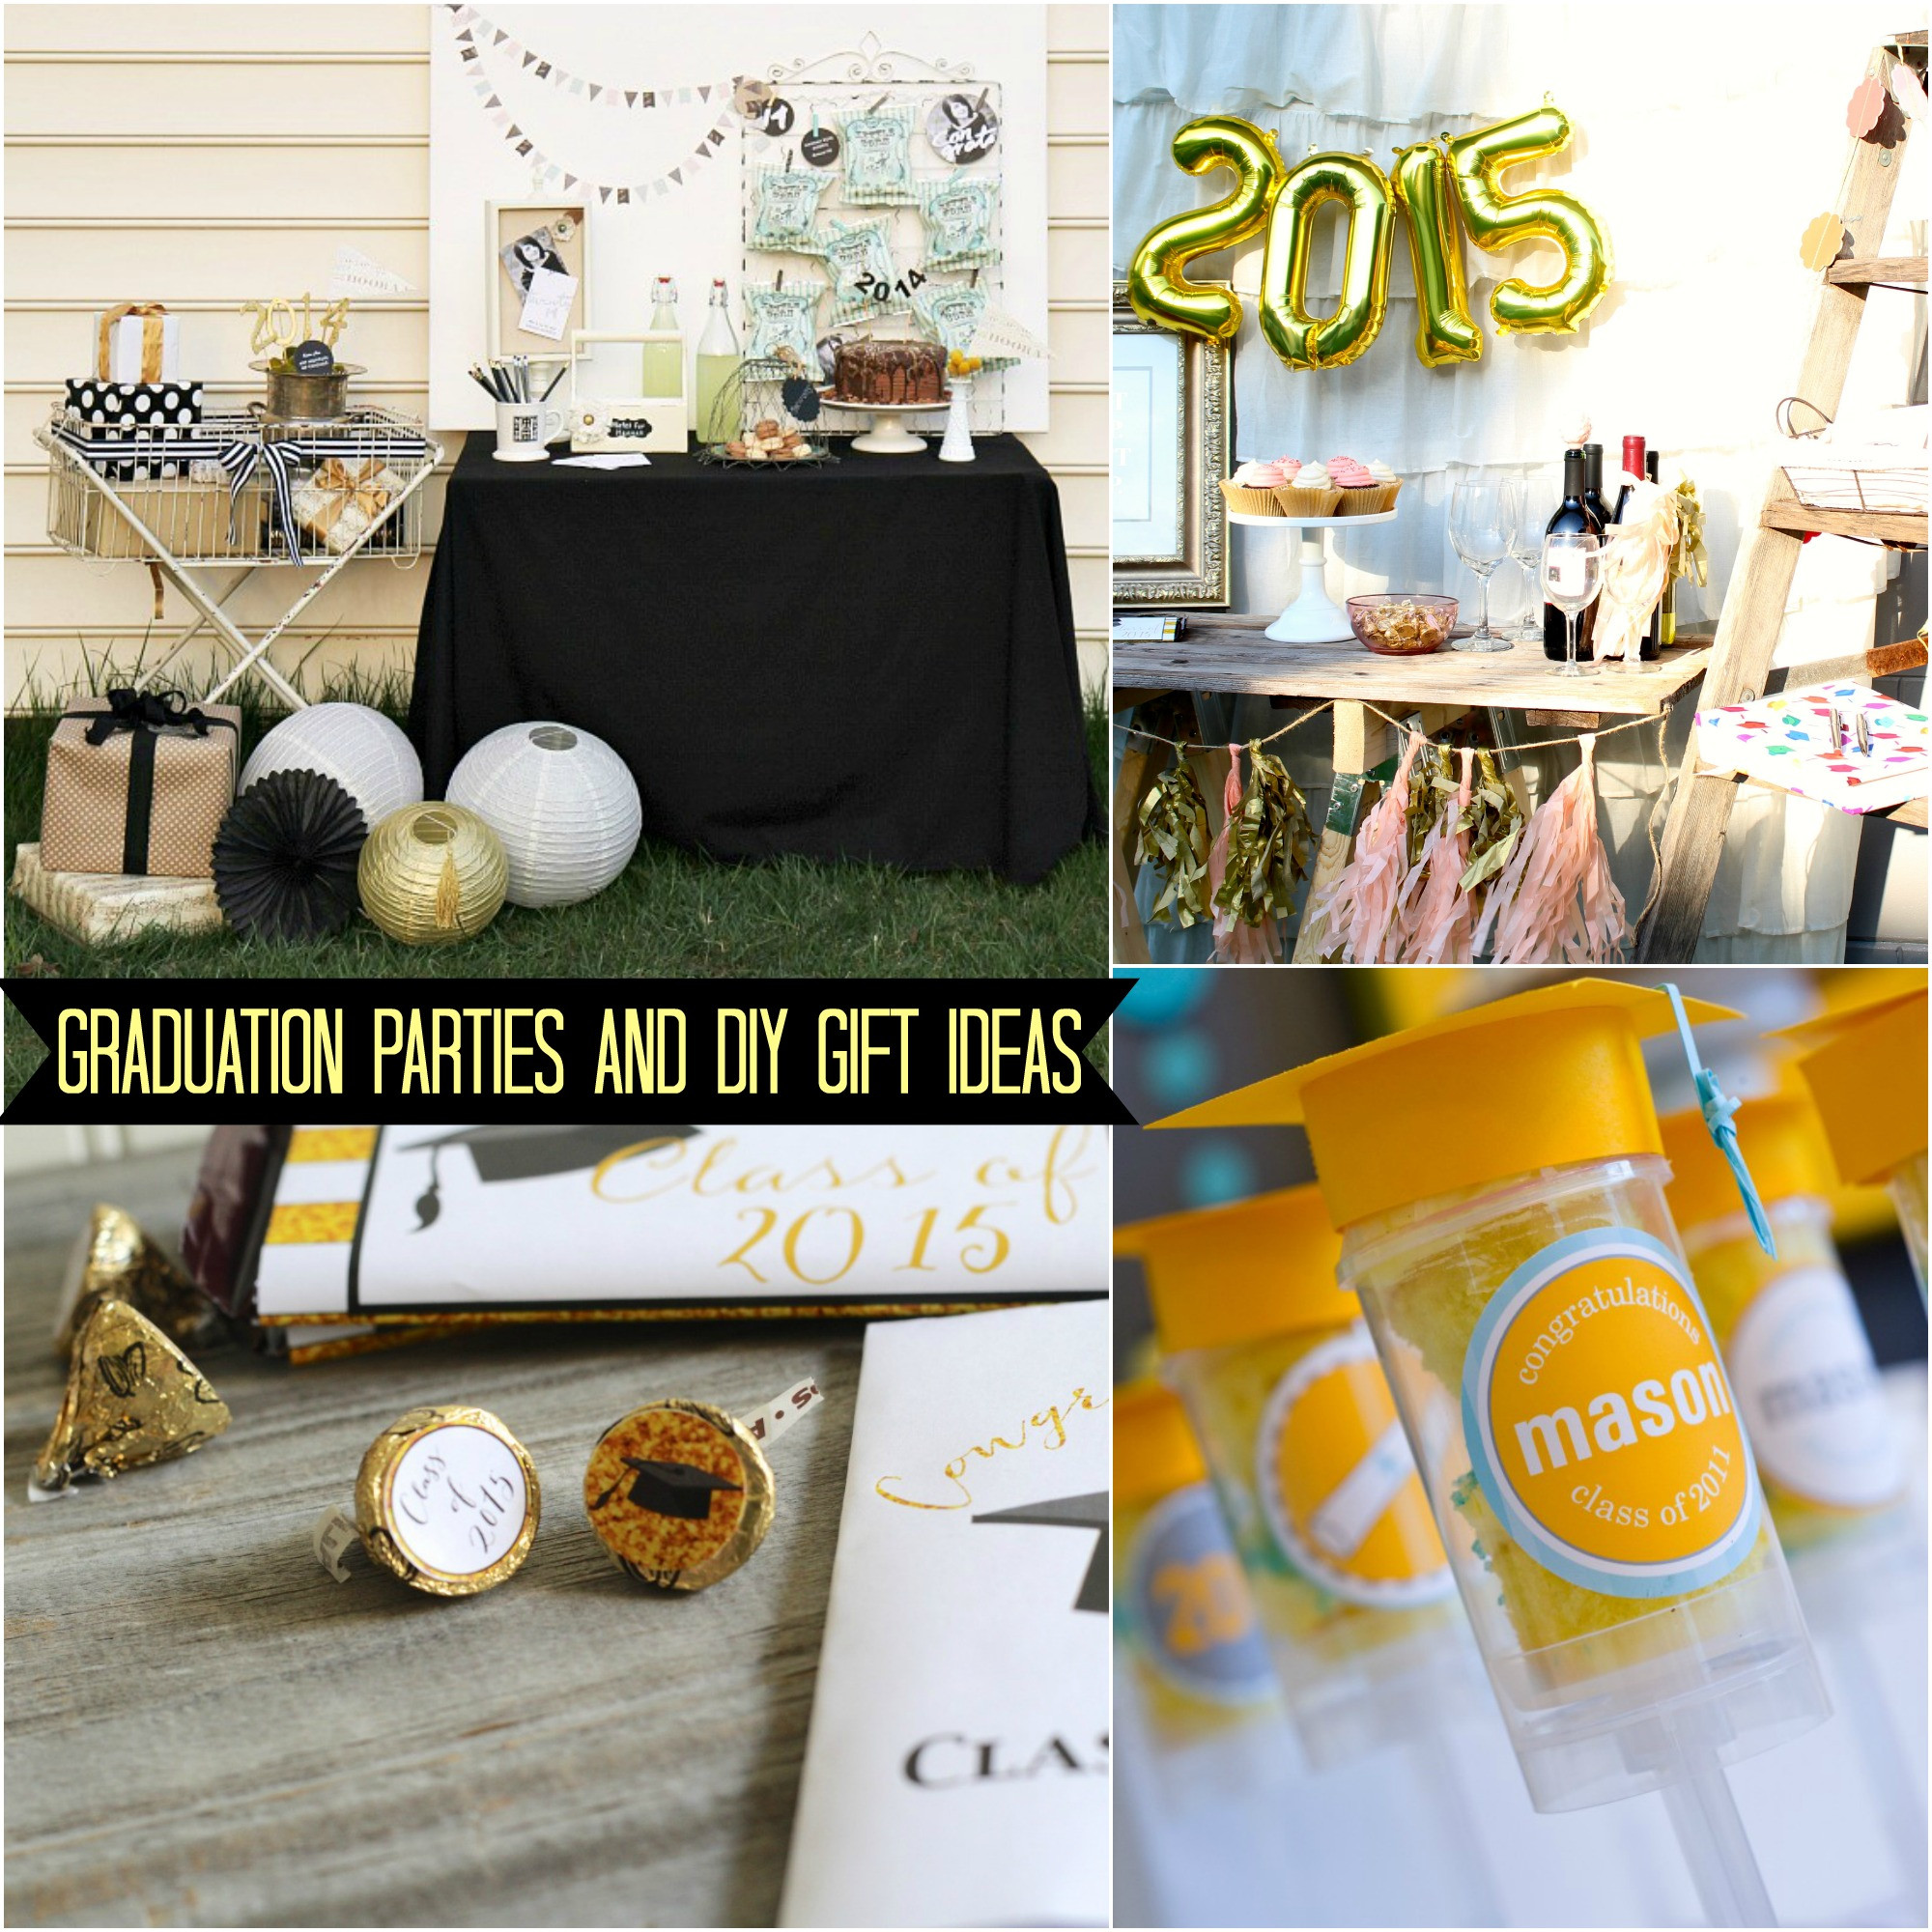 Graduation Party Gift Ideas
 Graduation Parties and DIY Gift Ideas